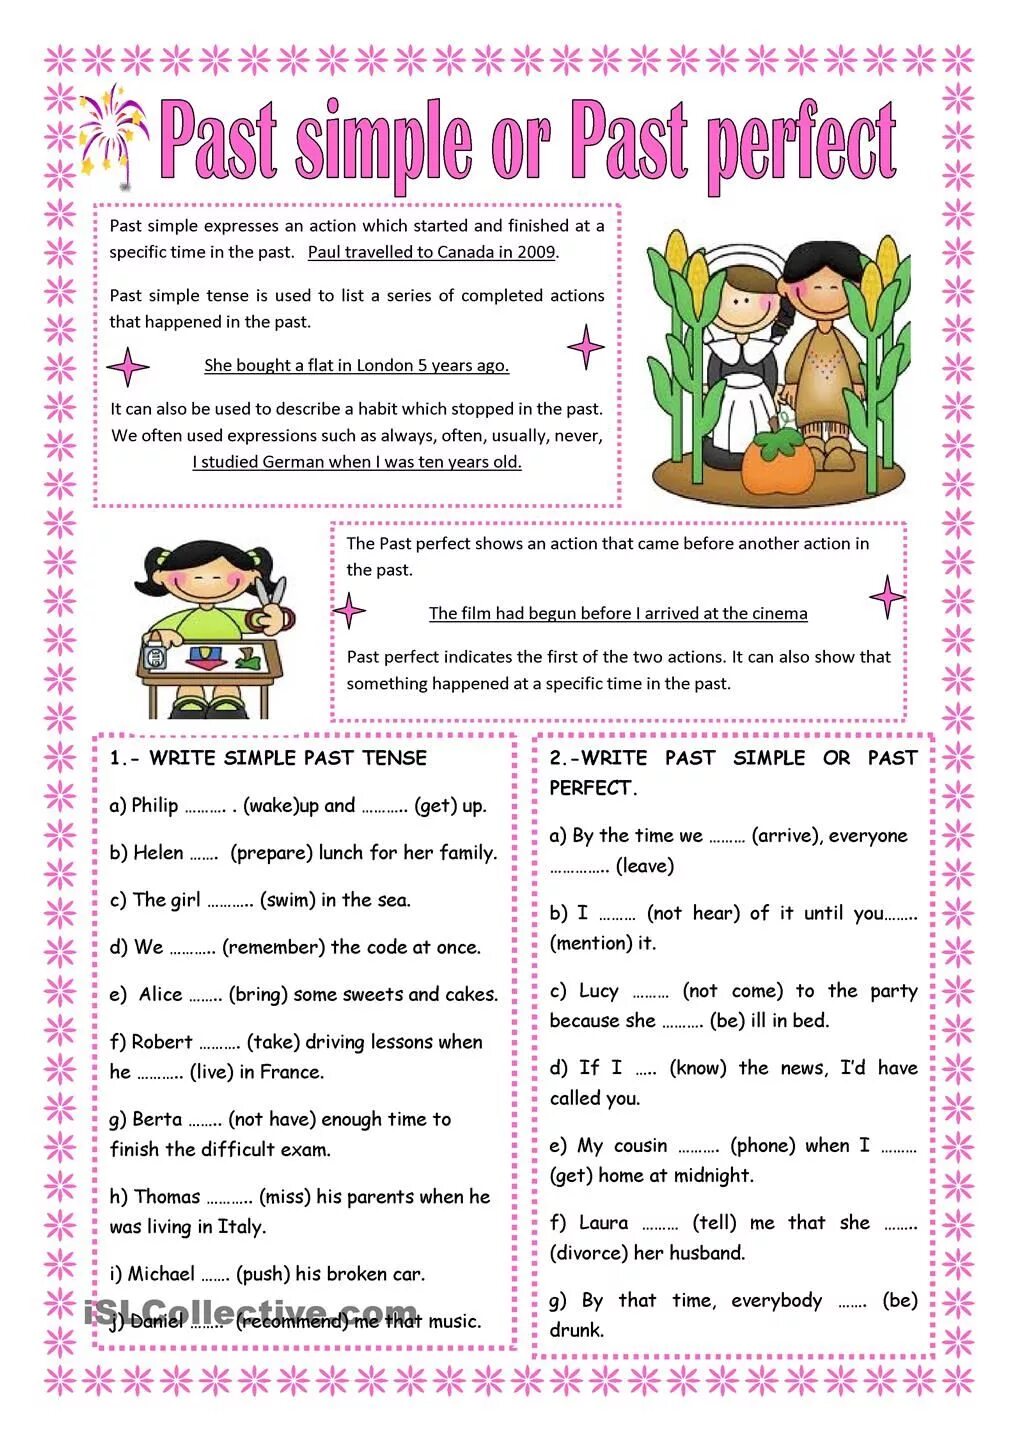 Past simple vs past perfect Worksheets. Present perfect vs past simple exercise. Present perfect past simple упражнения. Past simple present perfect past perfect упражнения. Present perfect vs past simple worksheet